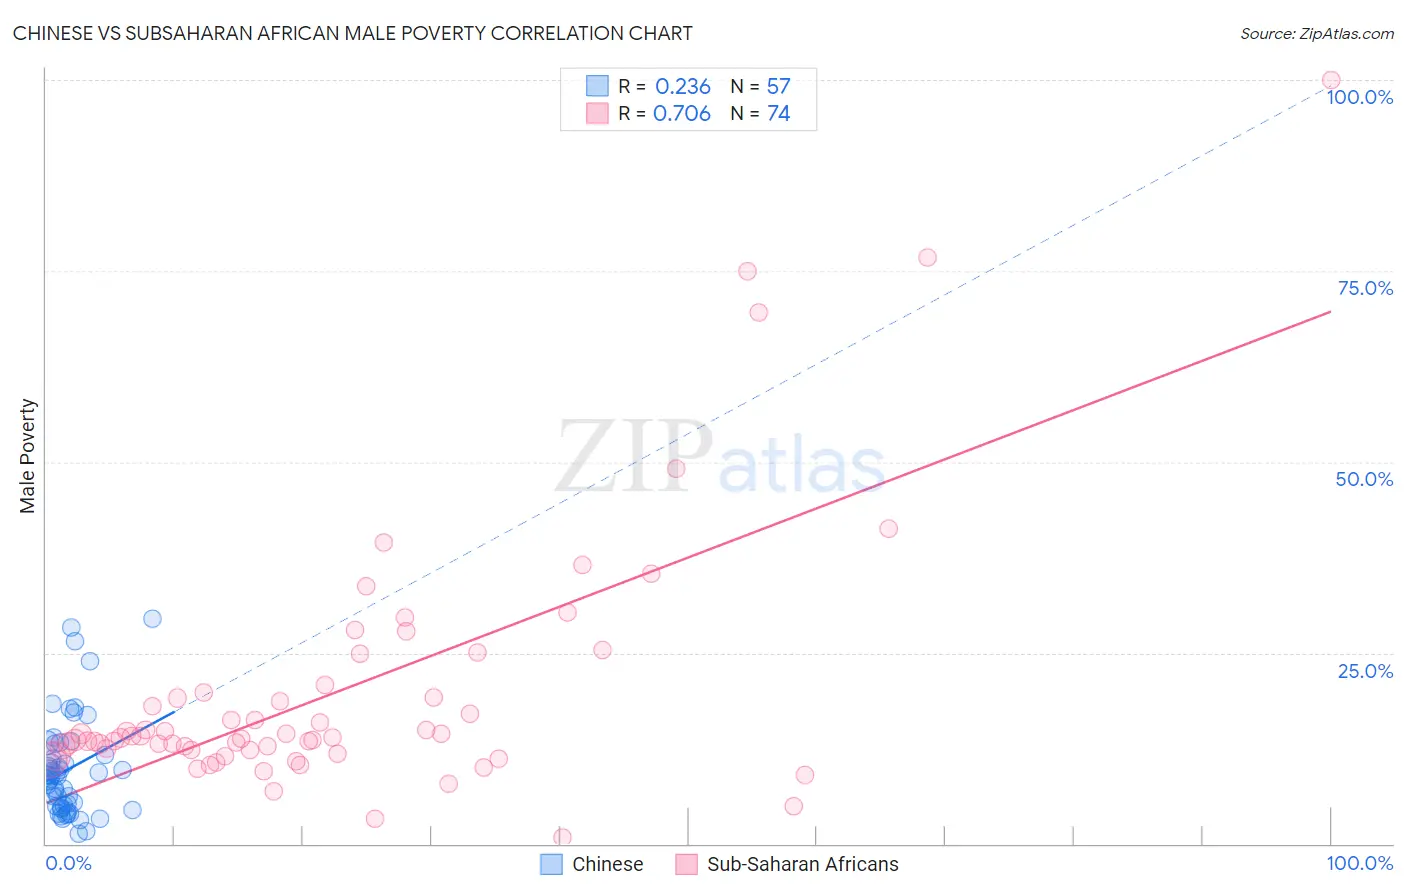 Chinese vs Subsaharan African Male Poverty